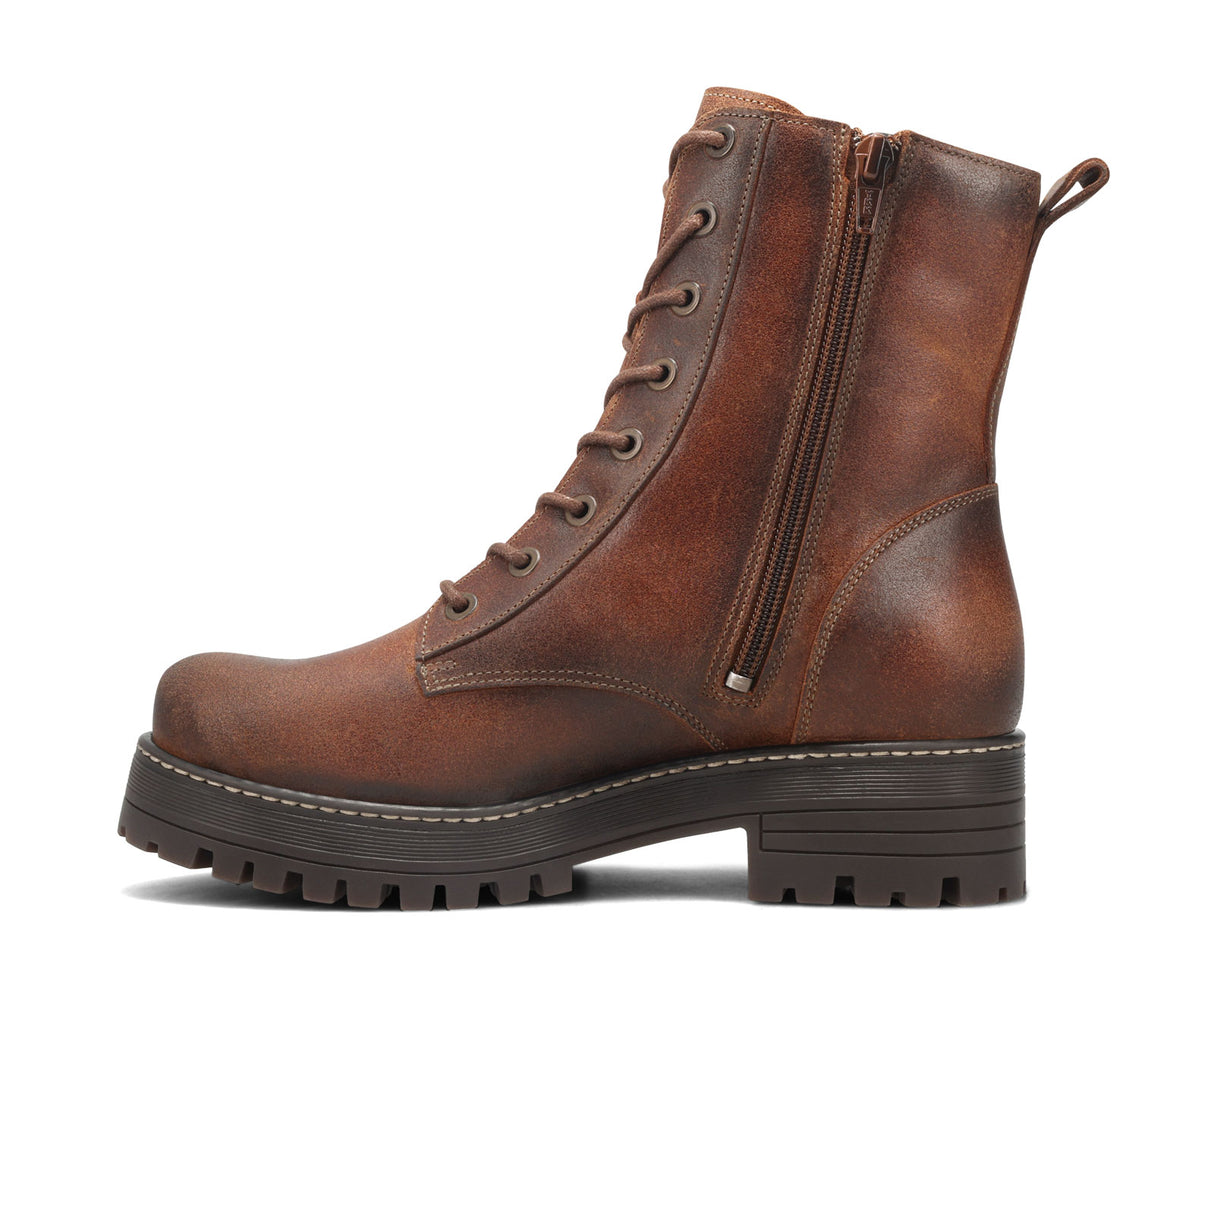 Taos Groupie Mid Boot (Women) - Cognac Rugged Boots - Fashion - Mid Boot - The Heel Shoe Fitters